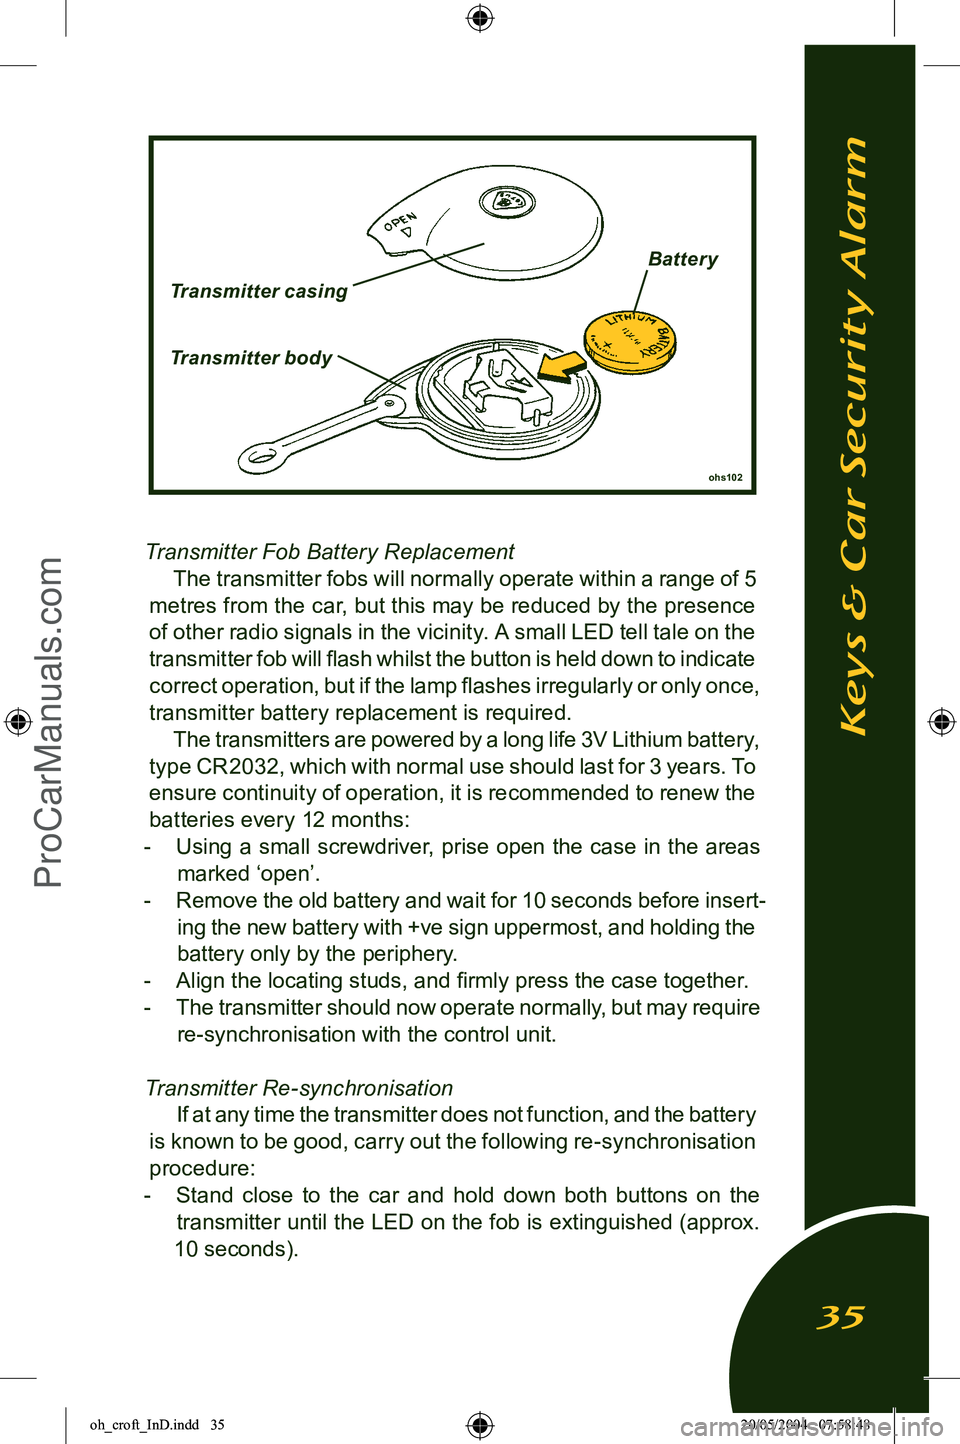 LOTUS ELISE 2005 User Guide 
Transmitter Fob Battery ReplacementThe transmitter fobs will normally operate within a range of 5 
metres from the car, but this may be reduced by the presence 
of other radio signals in the vicinity